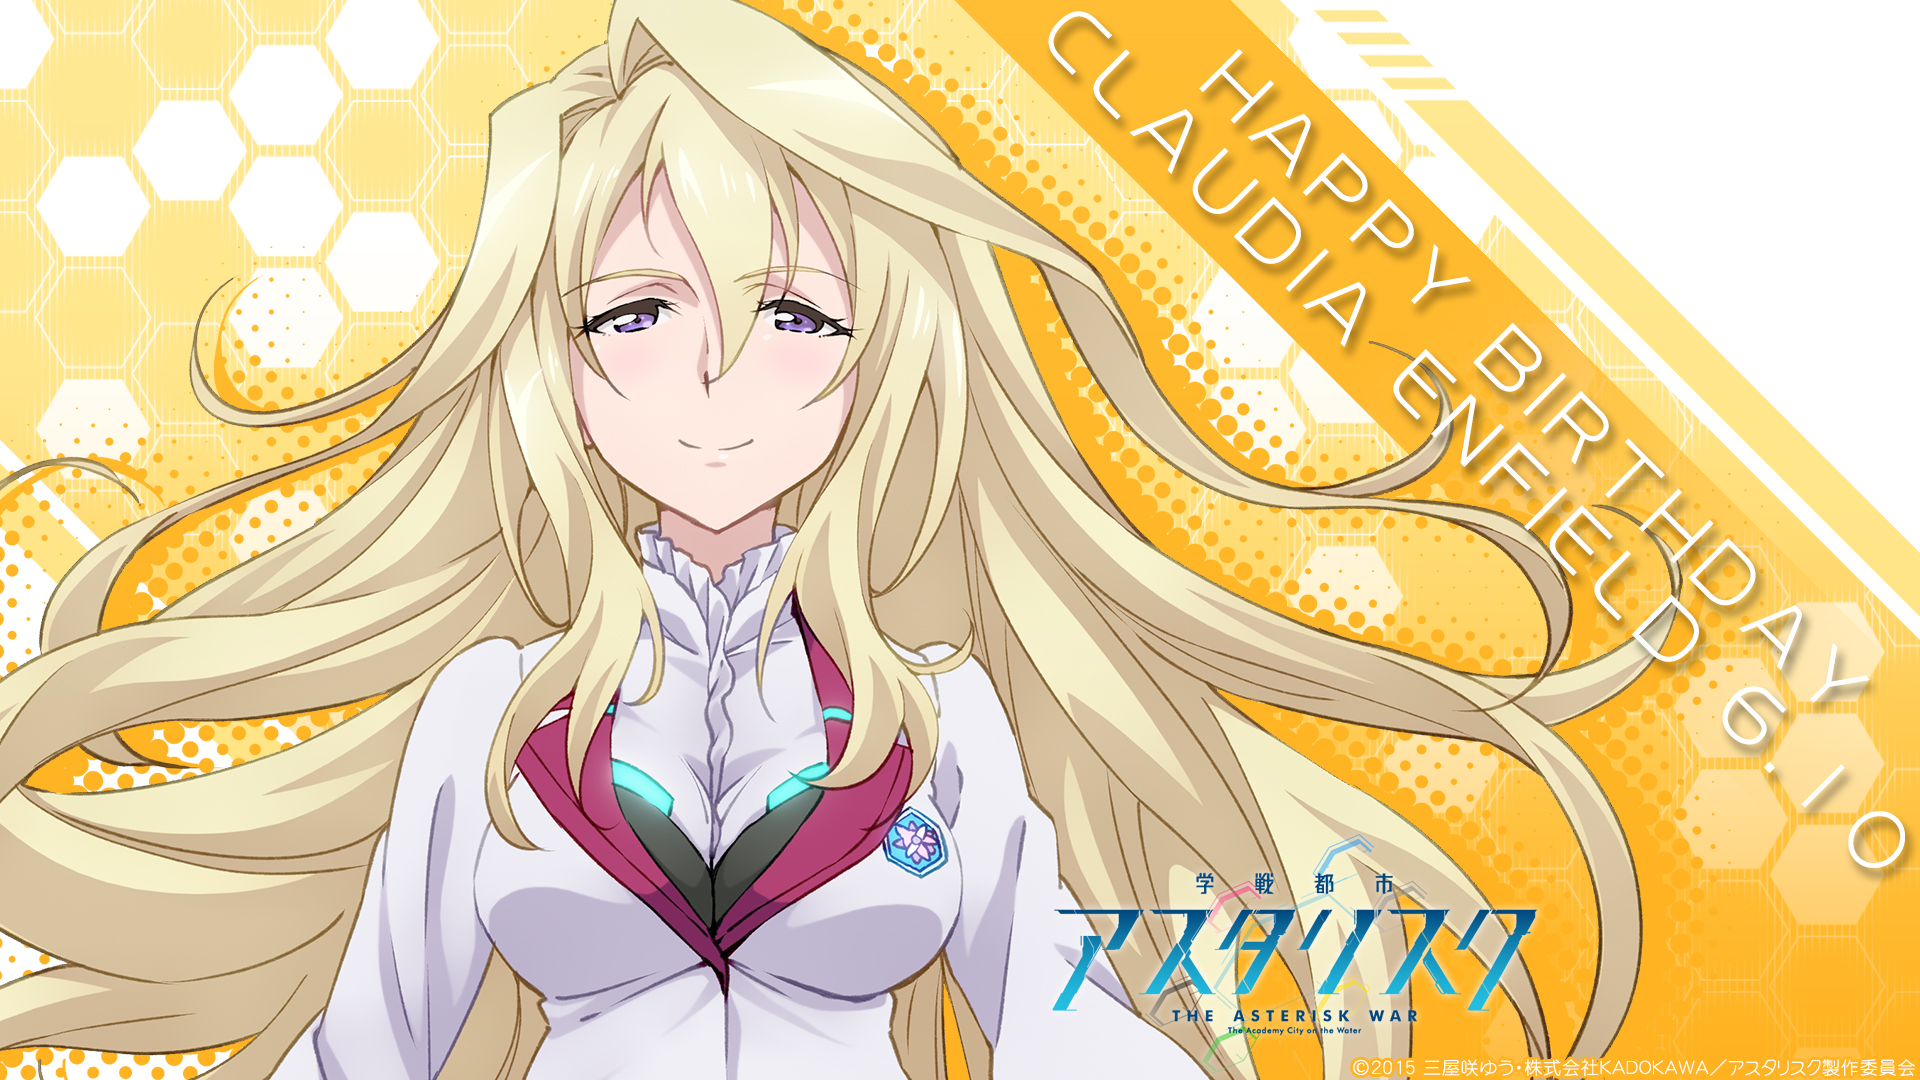 The Asterisk War Claudia Enfield